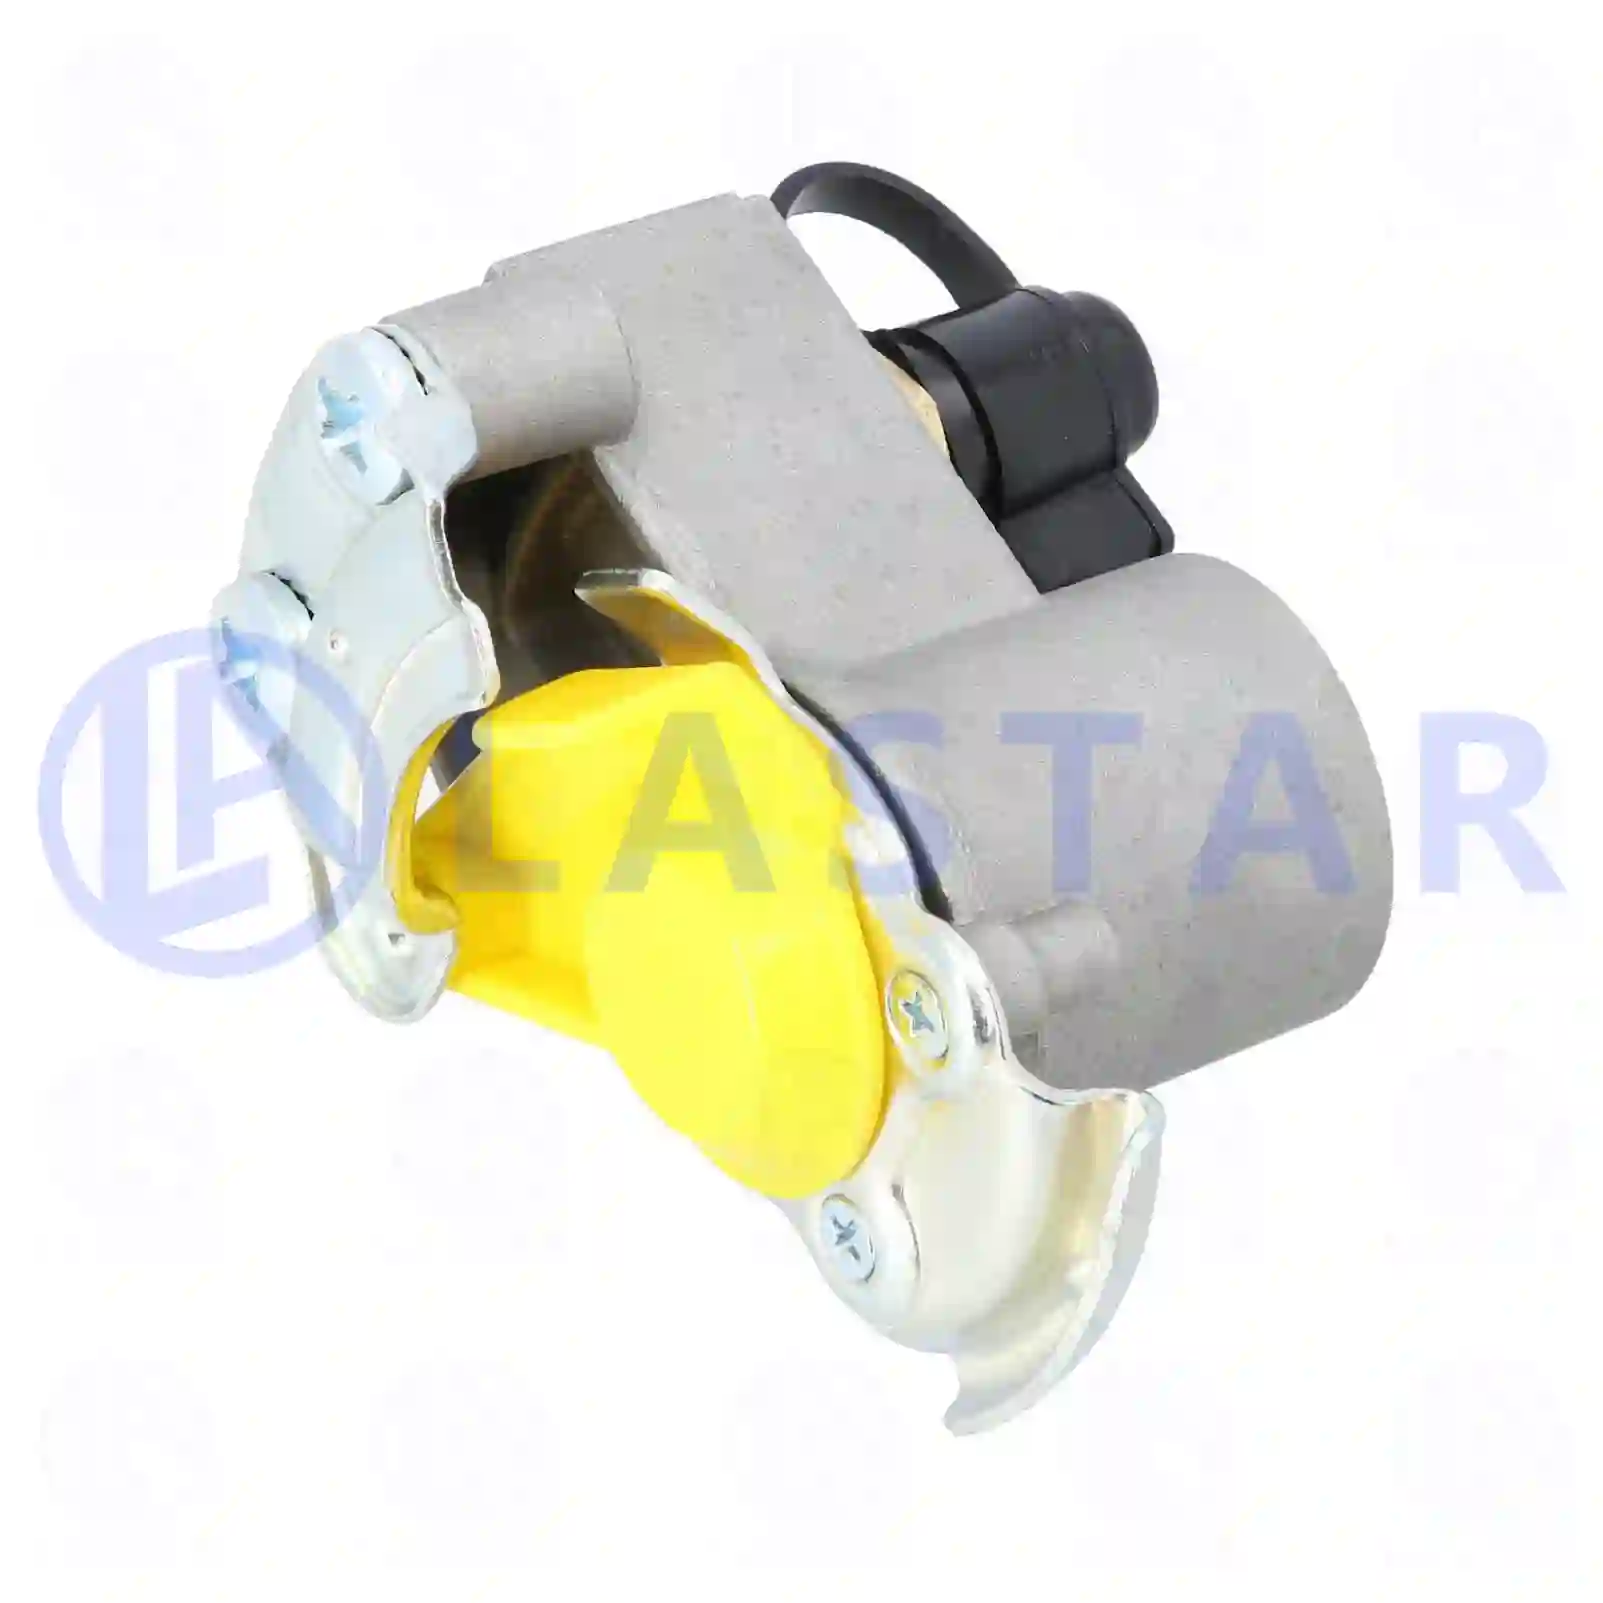  Palm coupling, test connector, yellow lid || Lastar Spare Part | Truck Spare Parts, Auotomotive Spare Parts